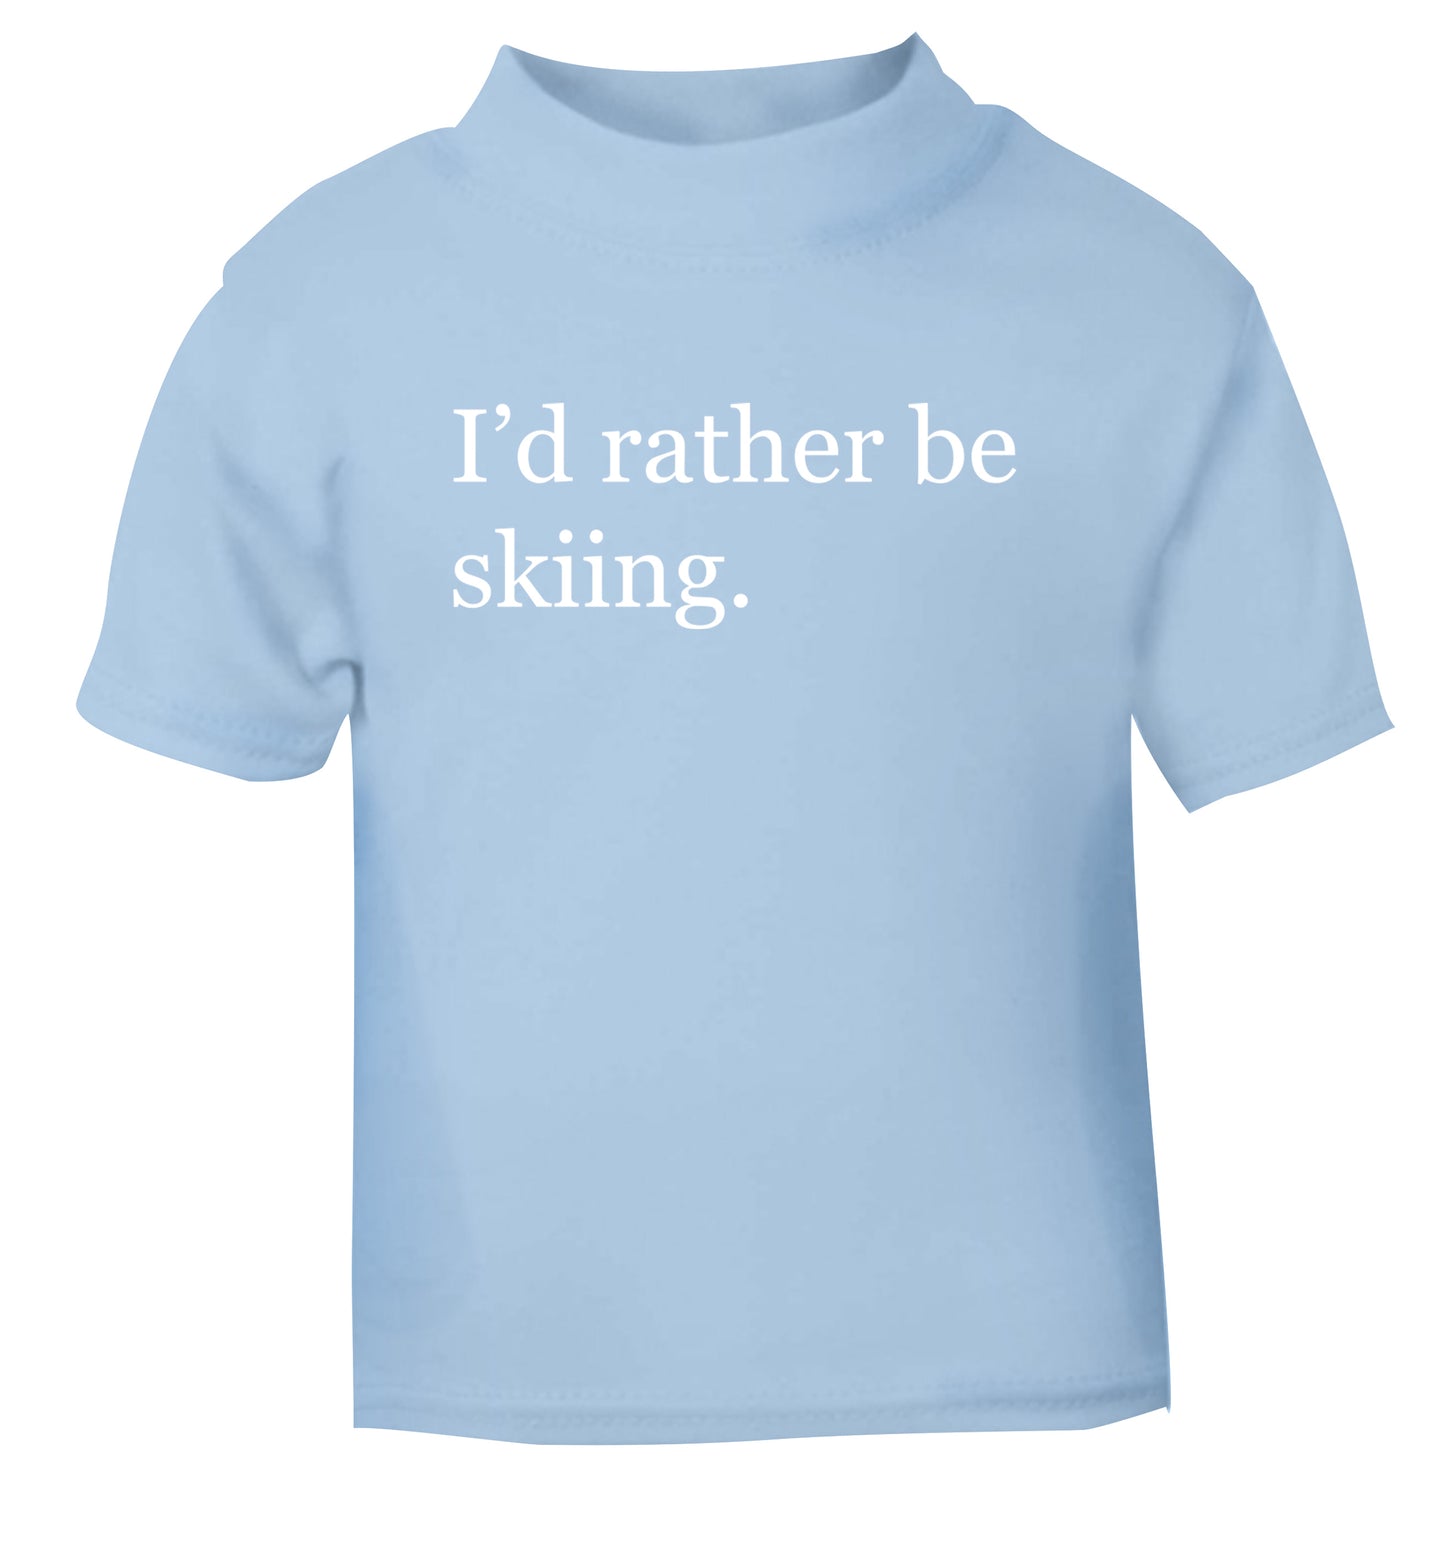 I'd rather be skiing light blue Baby Toddler Tshirt 2 Years